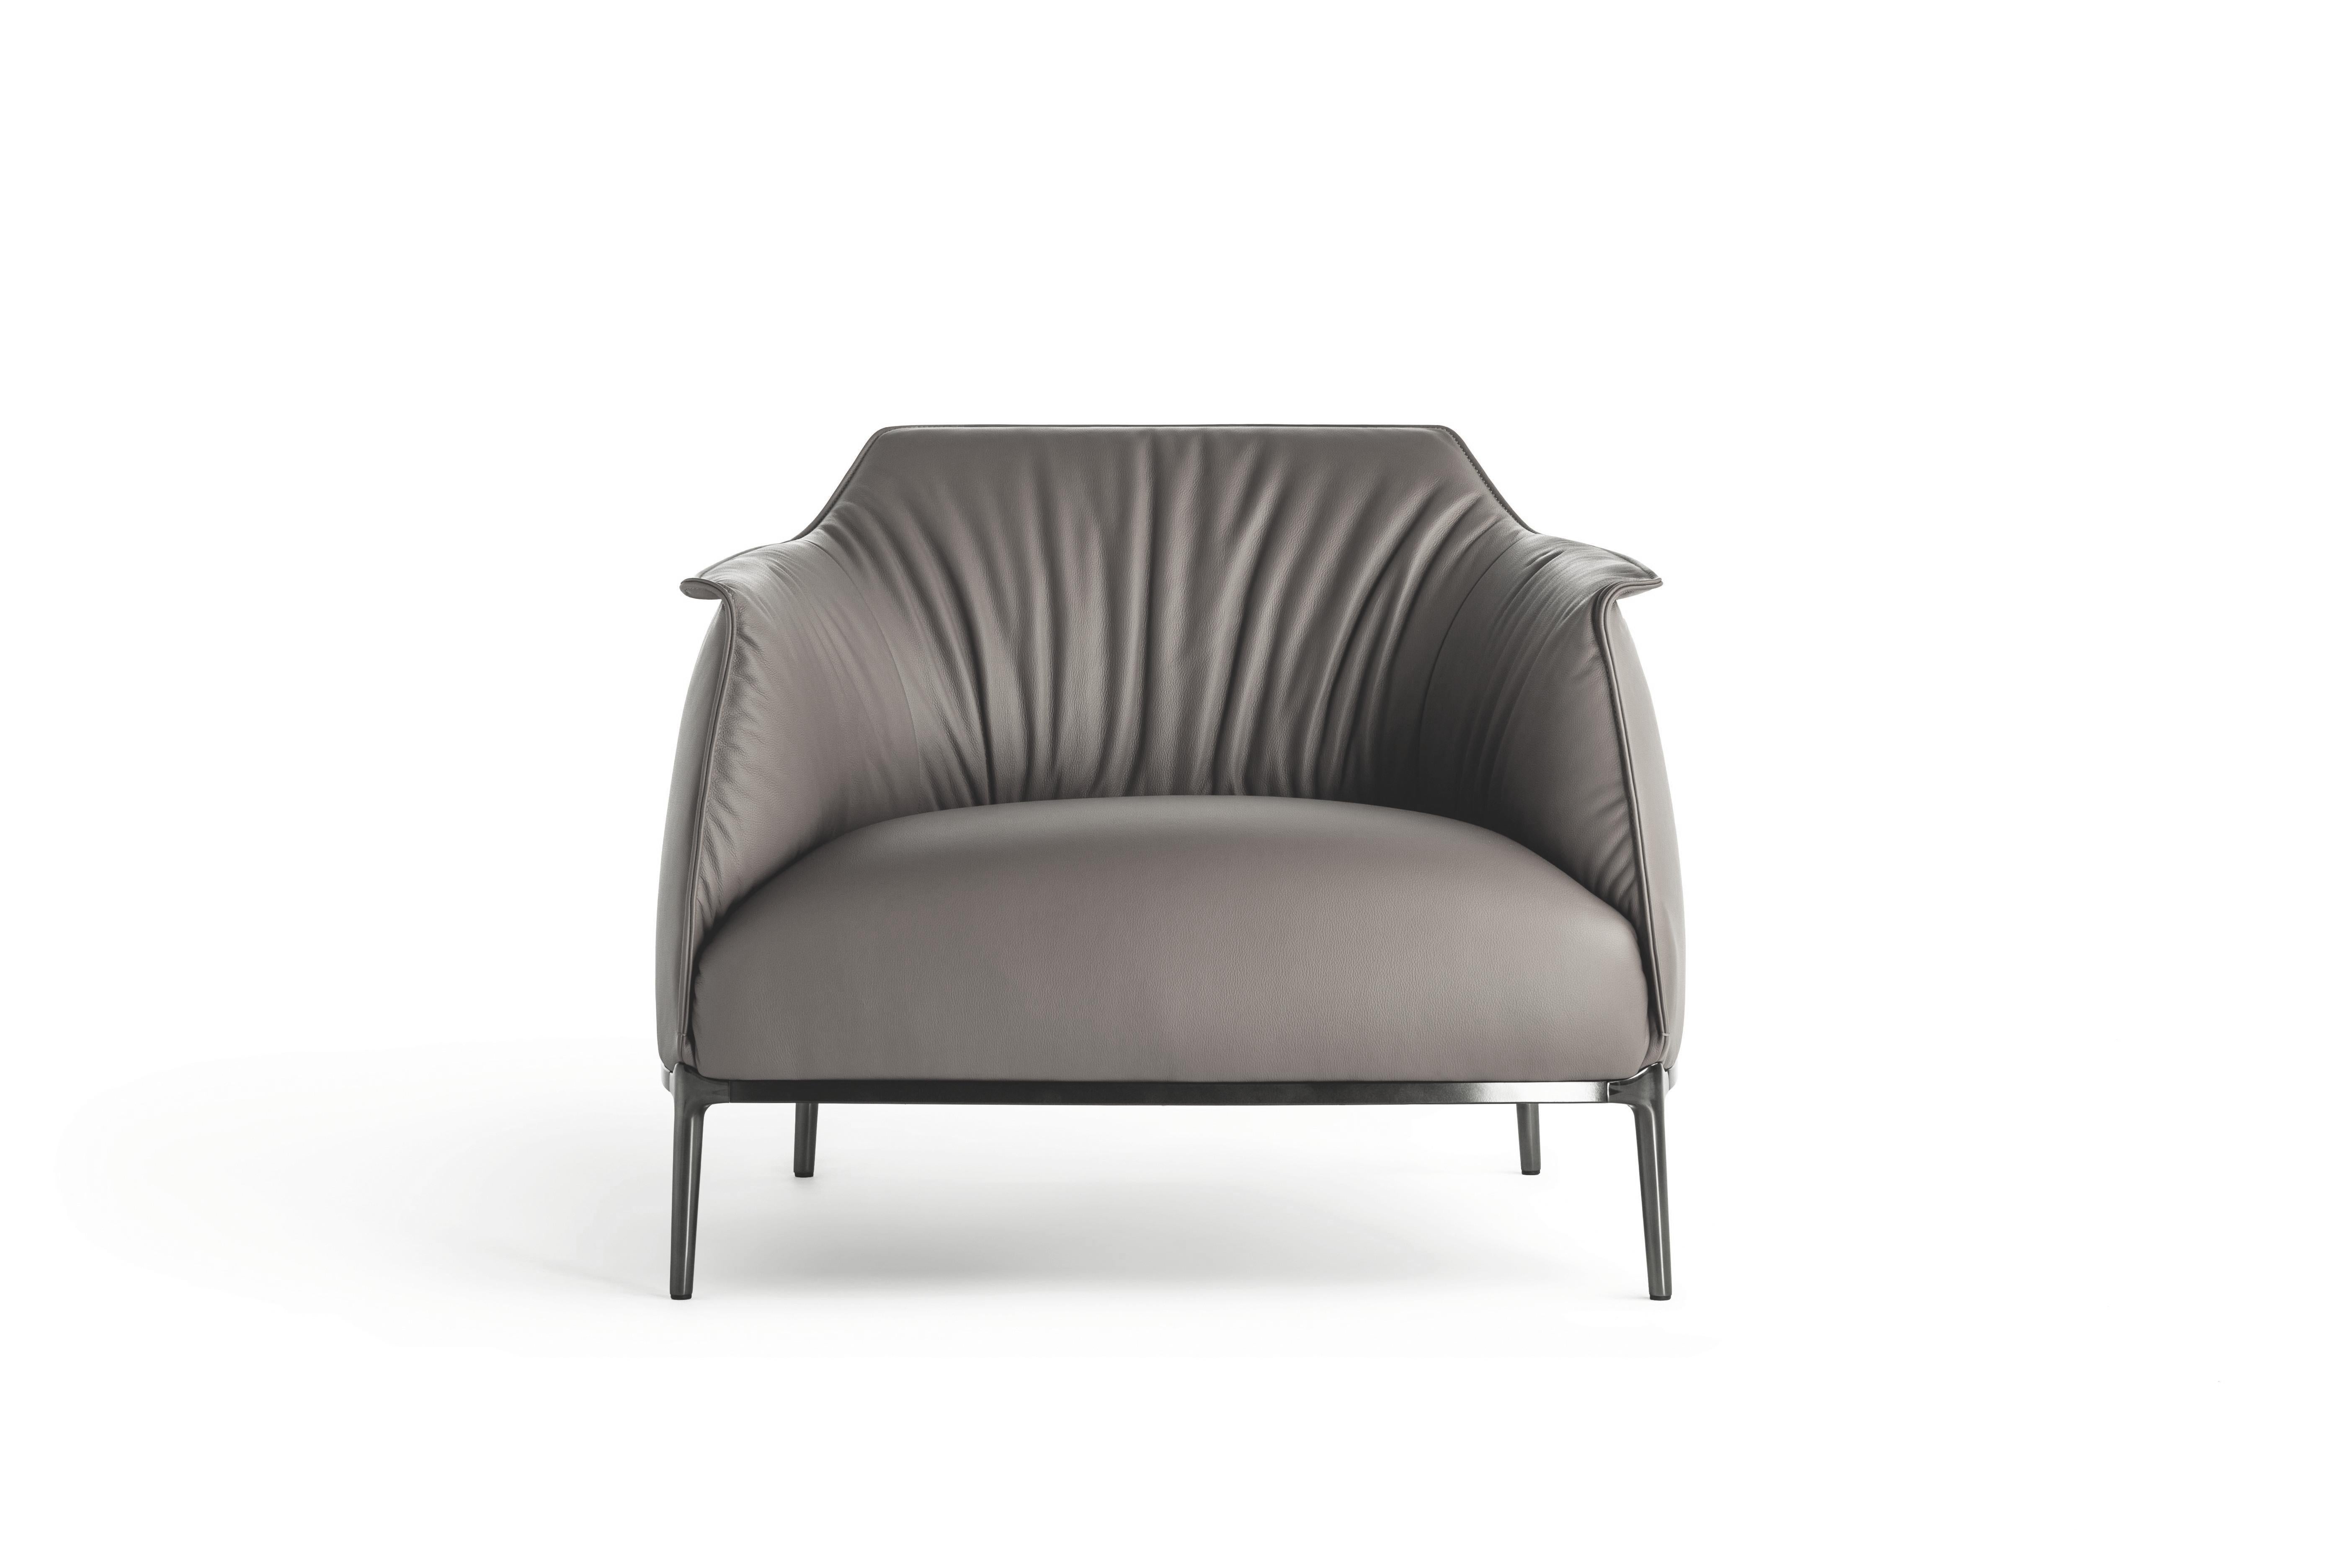 After Archibald, already released in three unmissable editions, and Archibald Gran Comfort, comes Archibald Large, the new version of the iconic armchair designed by Jean-Marie Massaud. A perfect combination of substance and form, Archibald is now